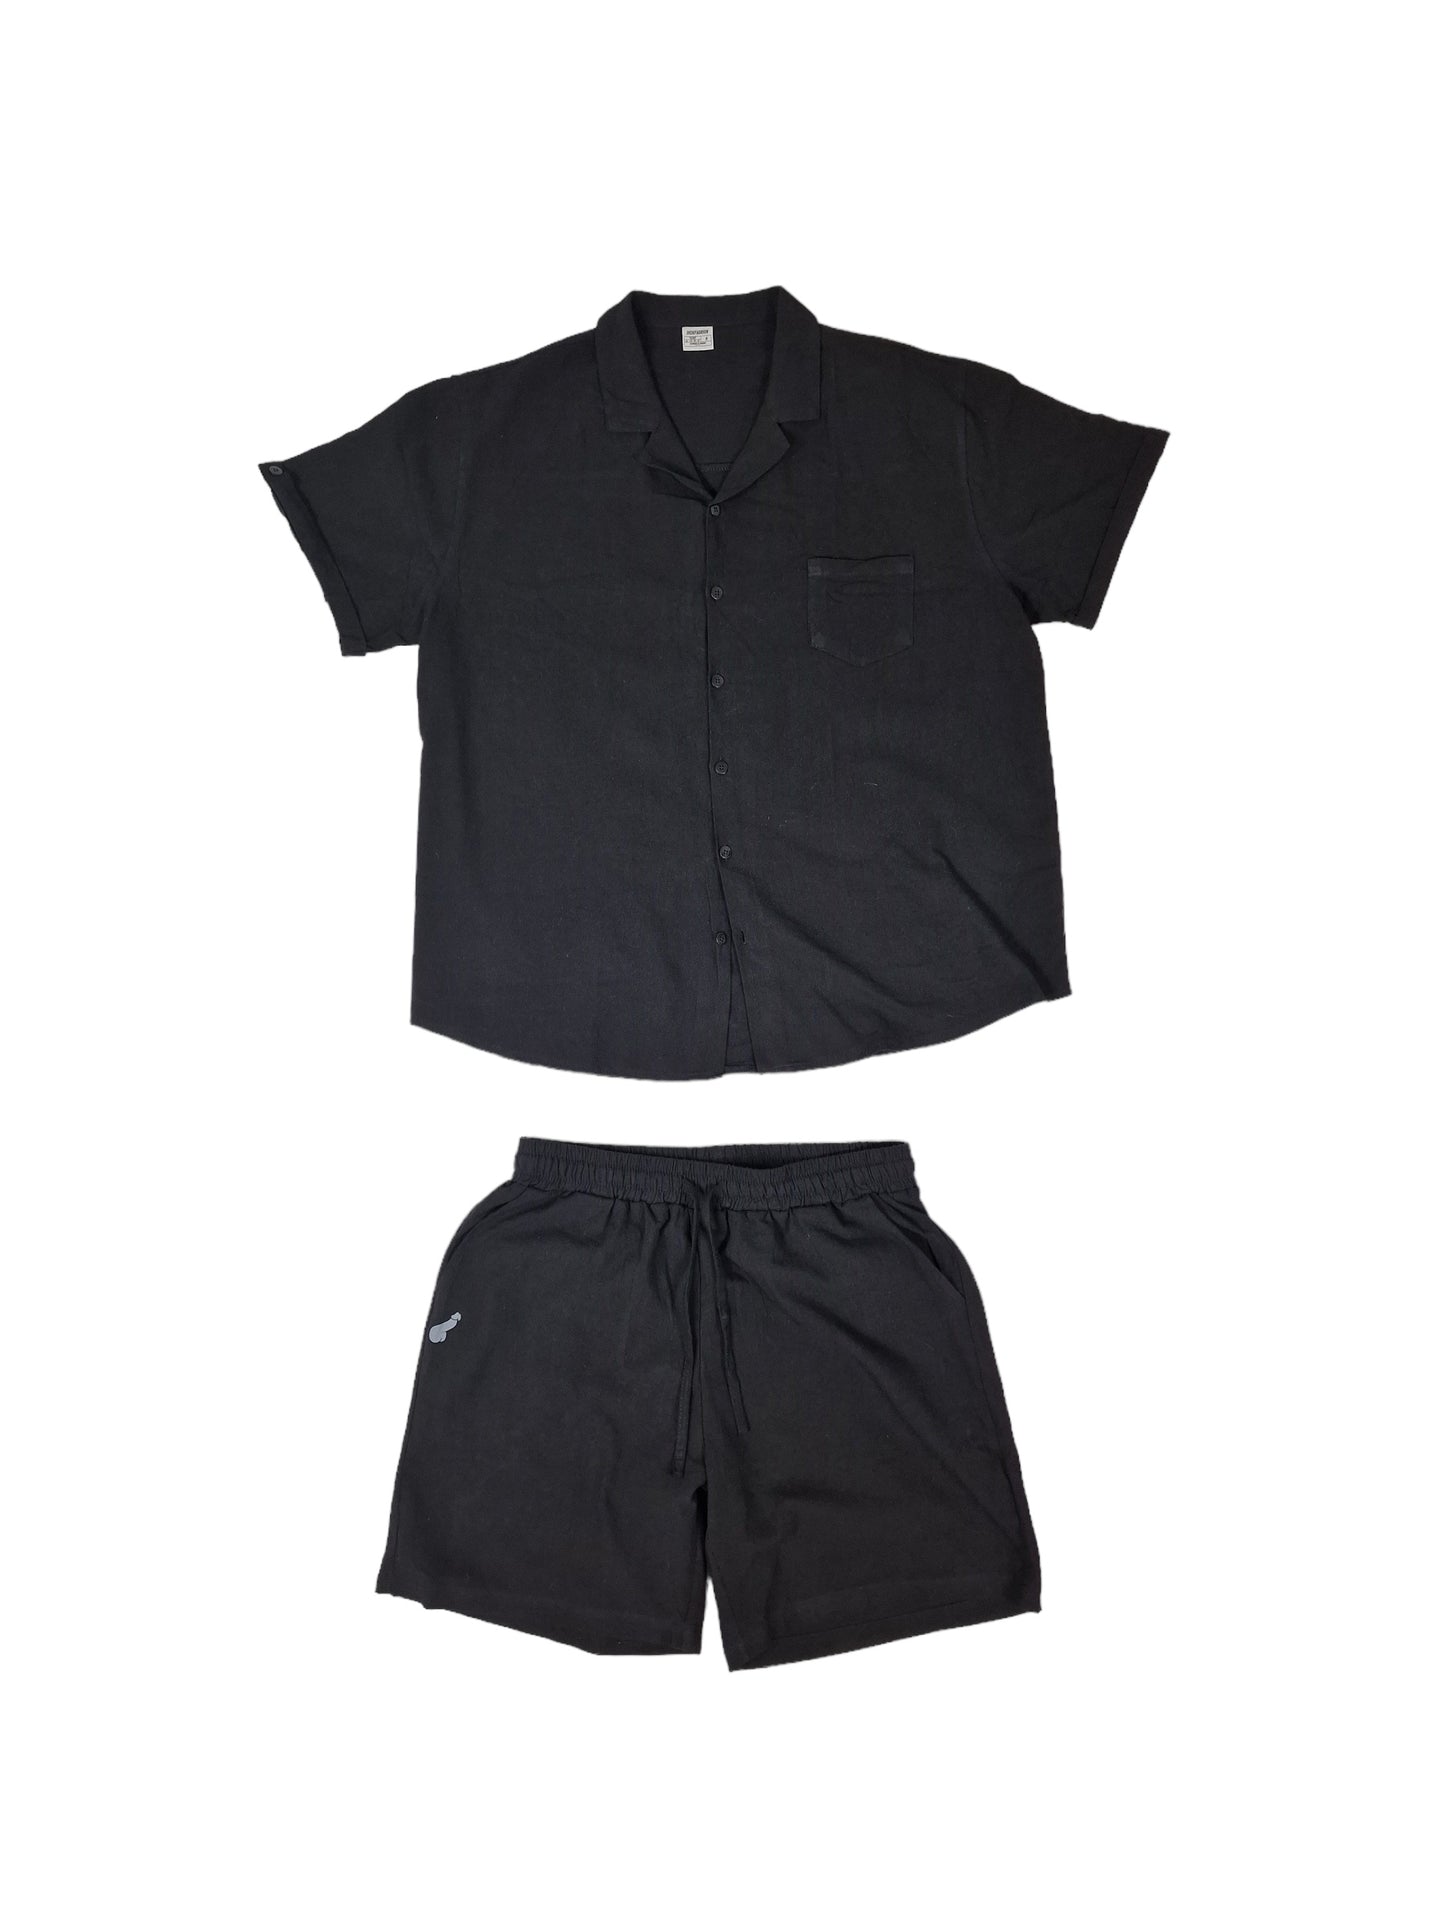 Linen and cotton set, shorts and shirt in relaxed fit - black with dick